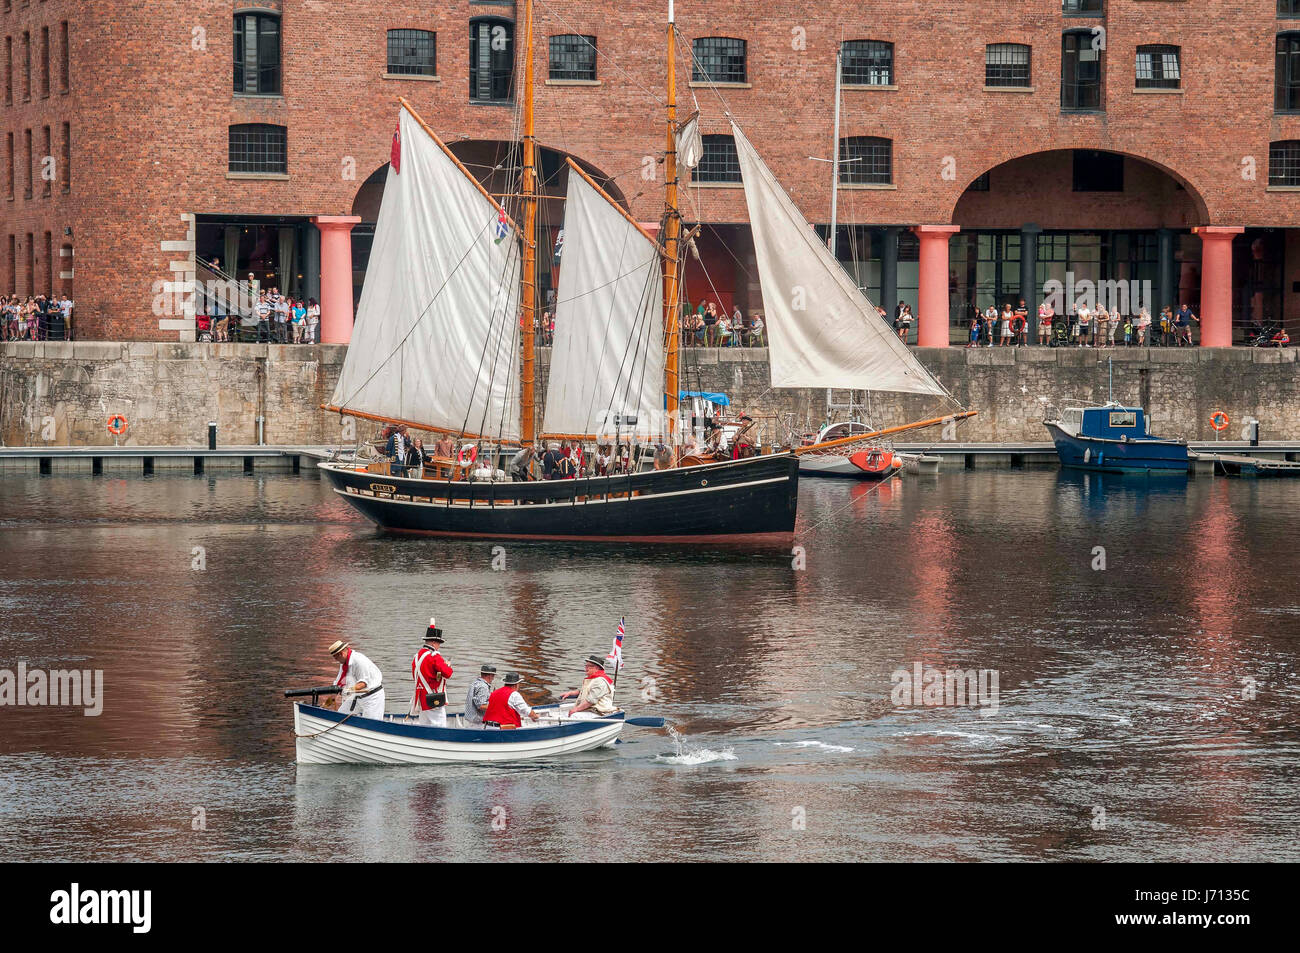 Battle of the Pirates at the Albert Dock. Pirate battle as part of the Mersey river festival at the Albert Dock. Stock Photo